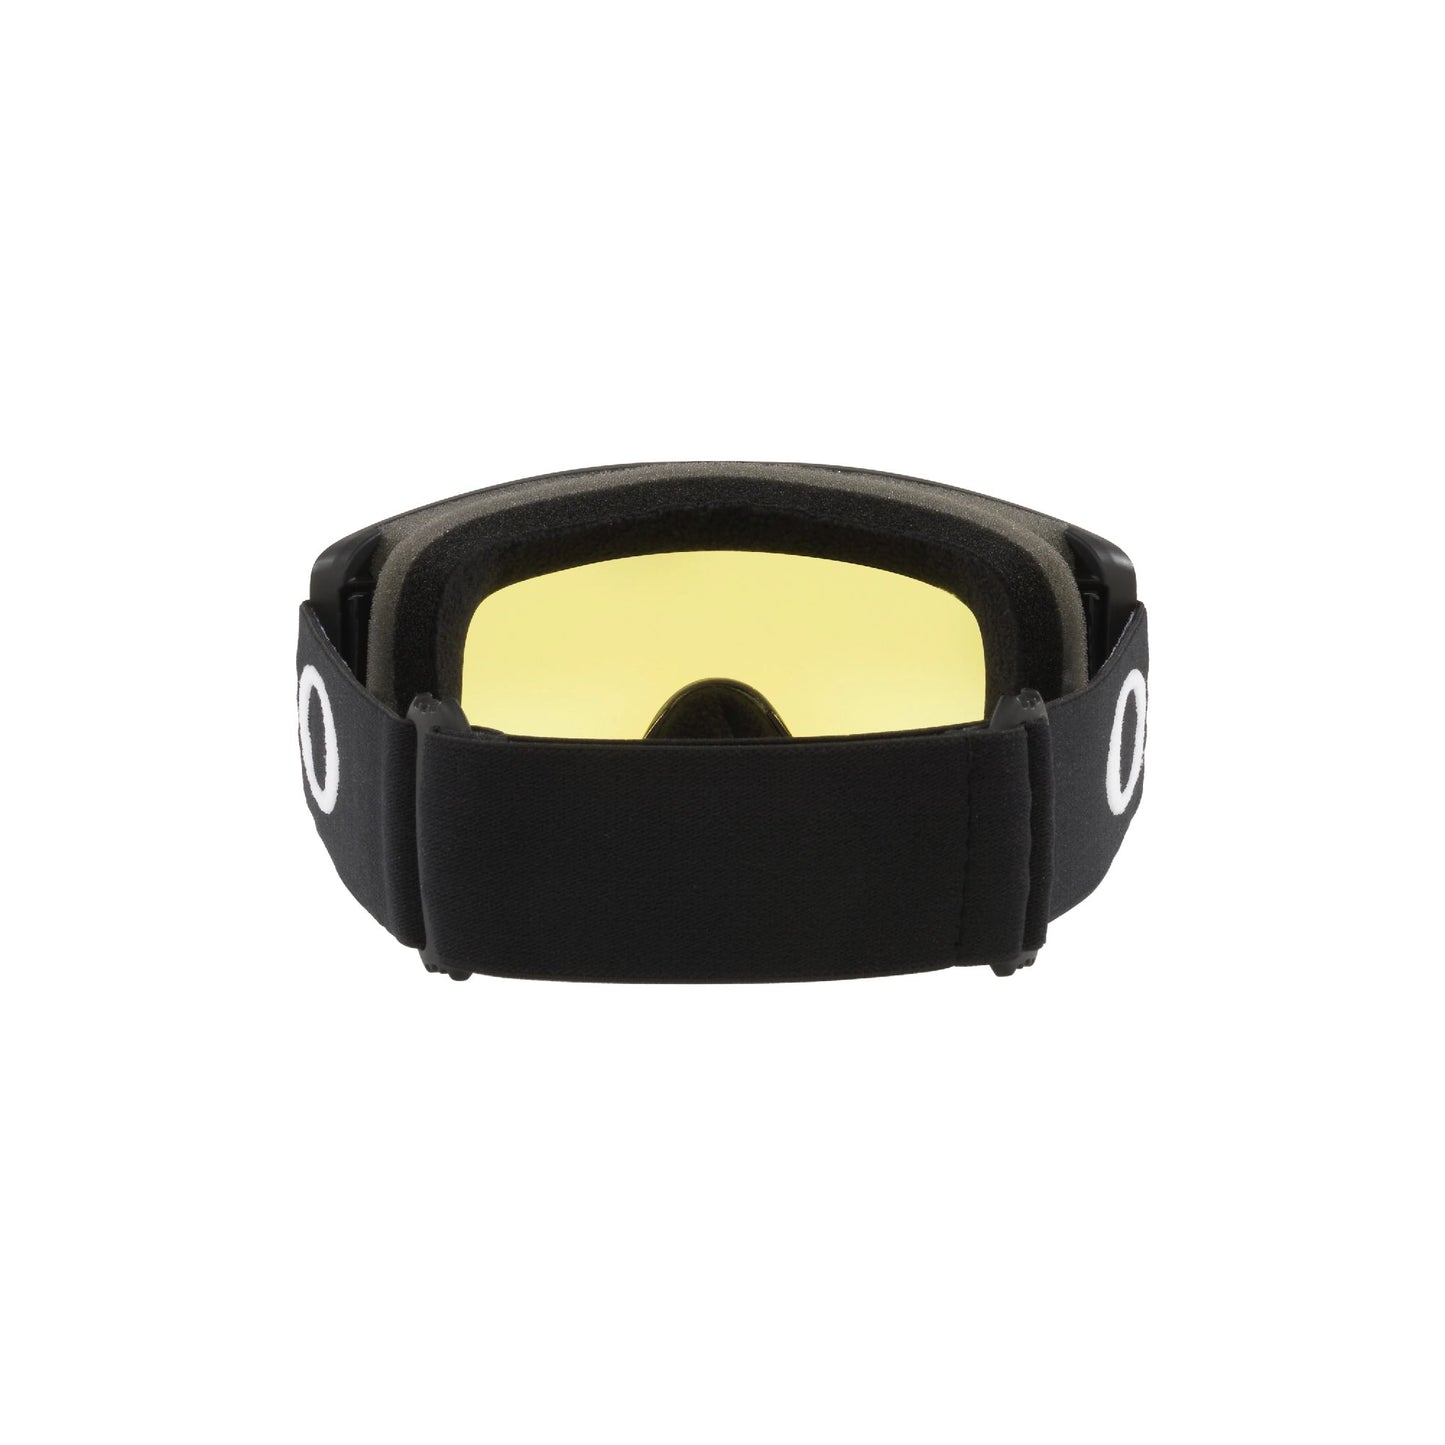 Oakley Youth Target Line S Snow Goggles Matte Black Hi Yellow Snow Goggles